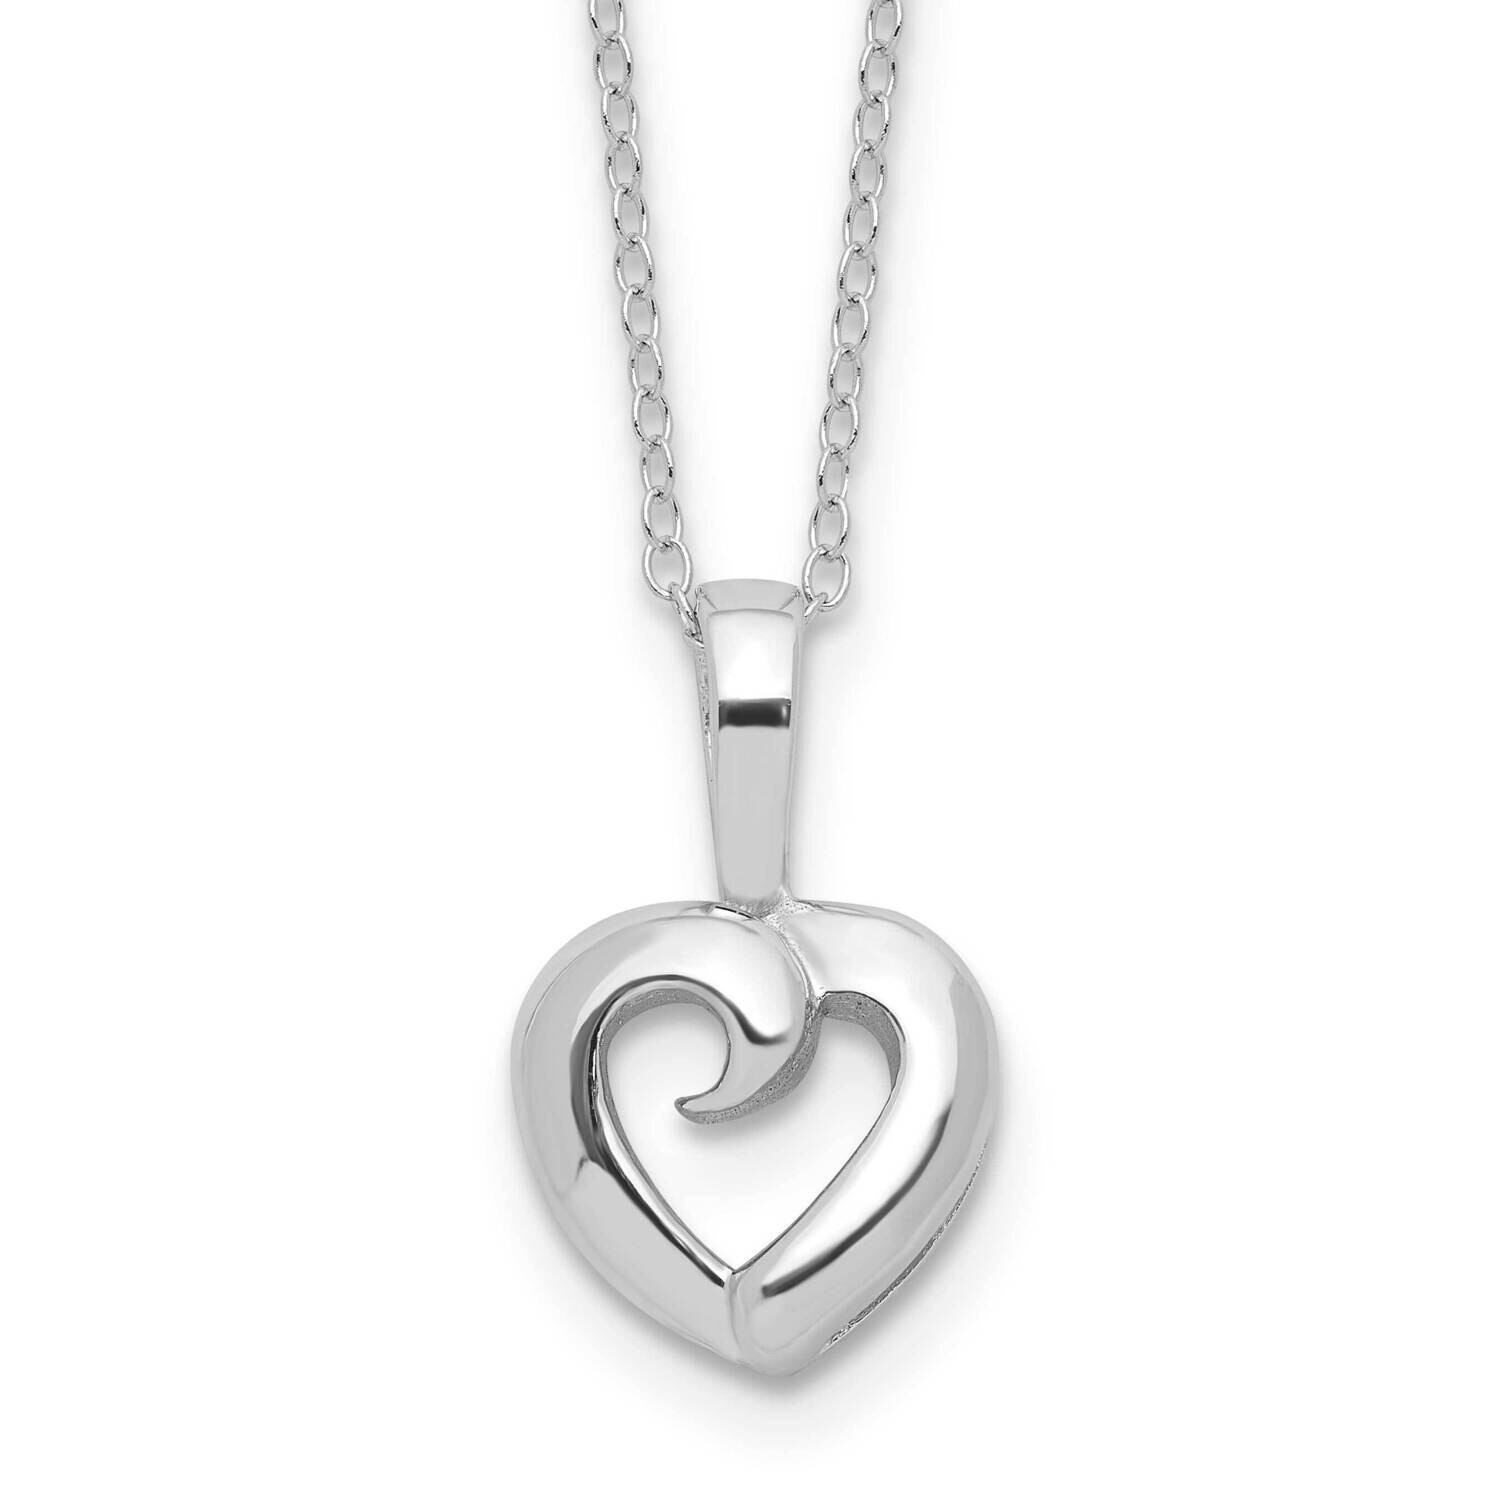 Heart 16 Inch 2 Inch Extension Necklace Sterling Silver Rhodium-Plated QG6613-16